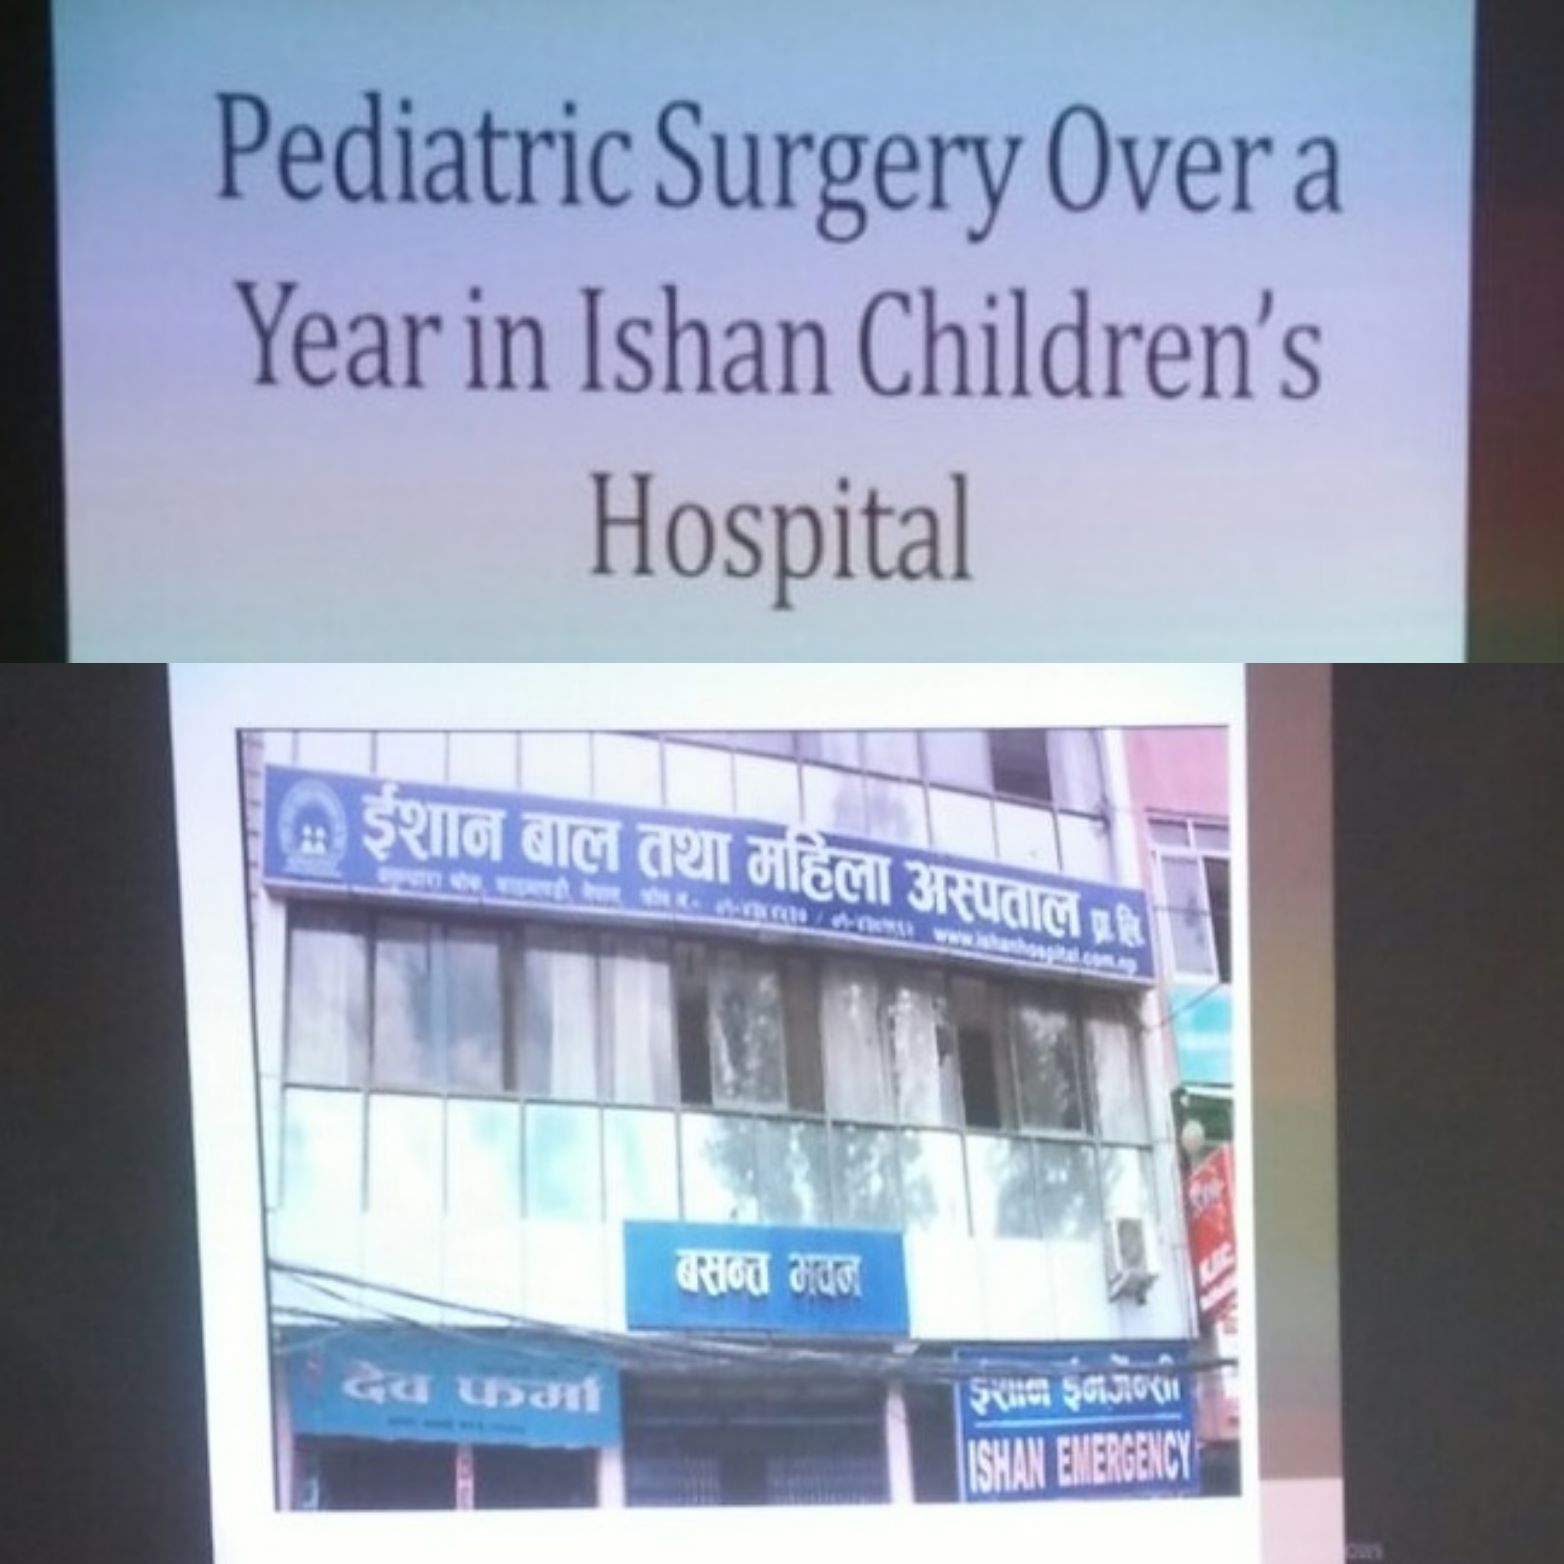 CME on one year Audit of Department of Pediatric Surgery of Ishan Hospital